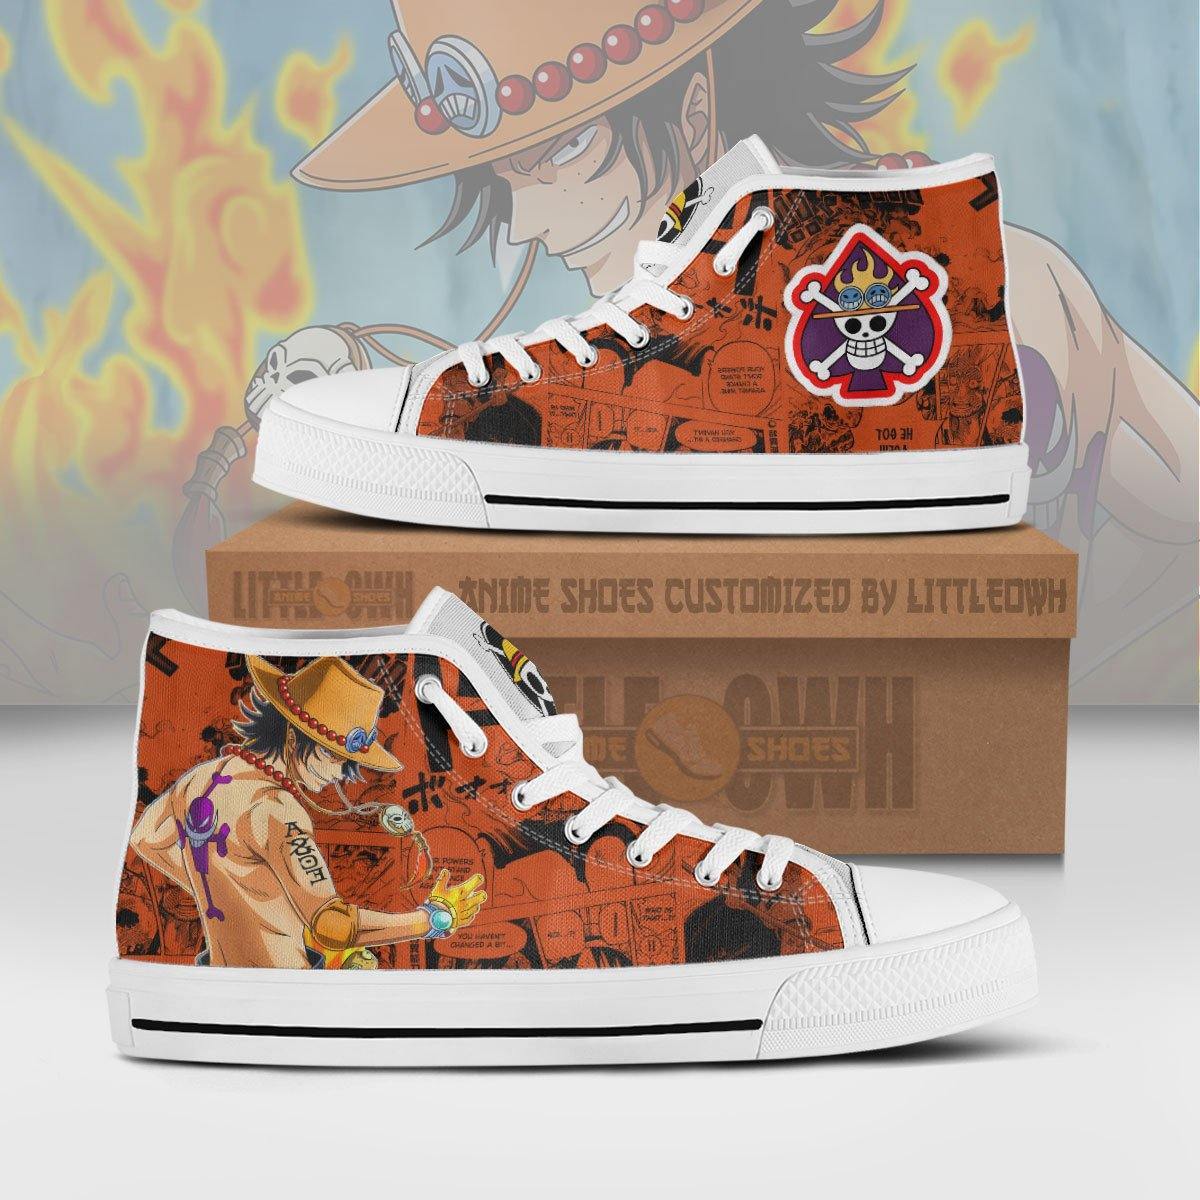 Portgas D. Ace High Top Shoes Custom One Piece Anime Canvas Sneakers